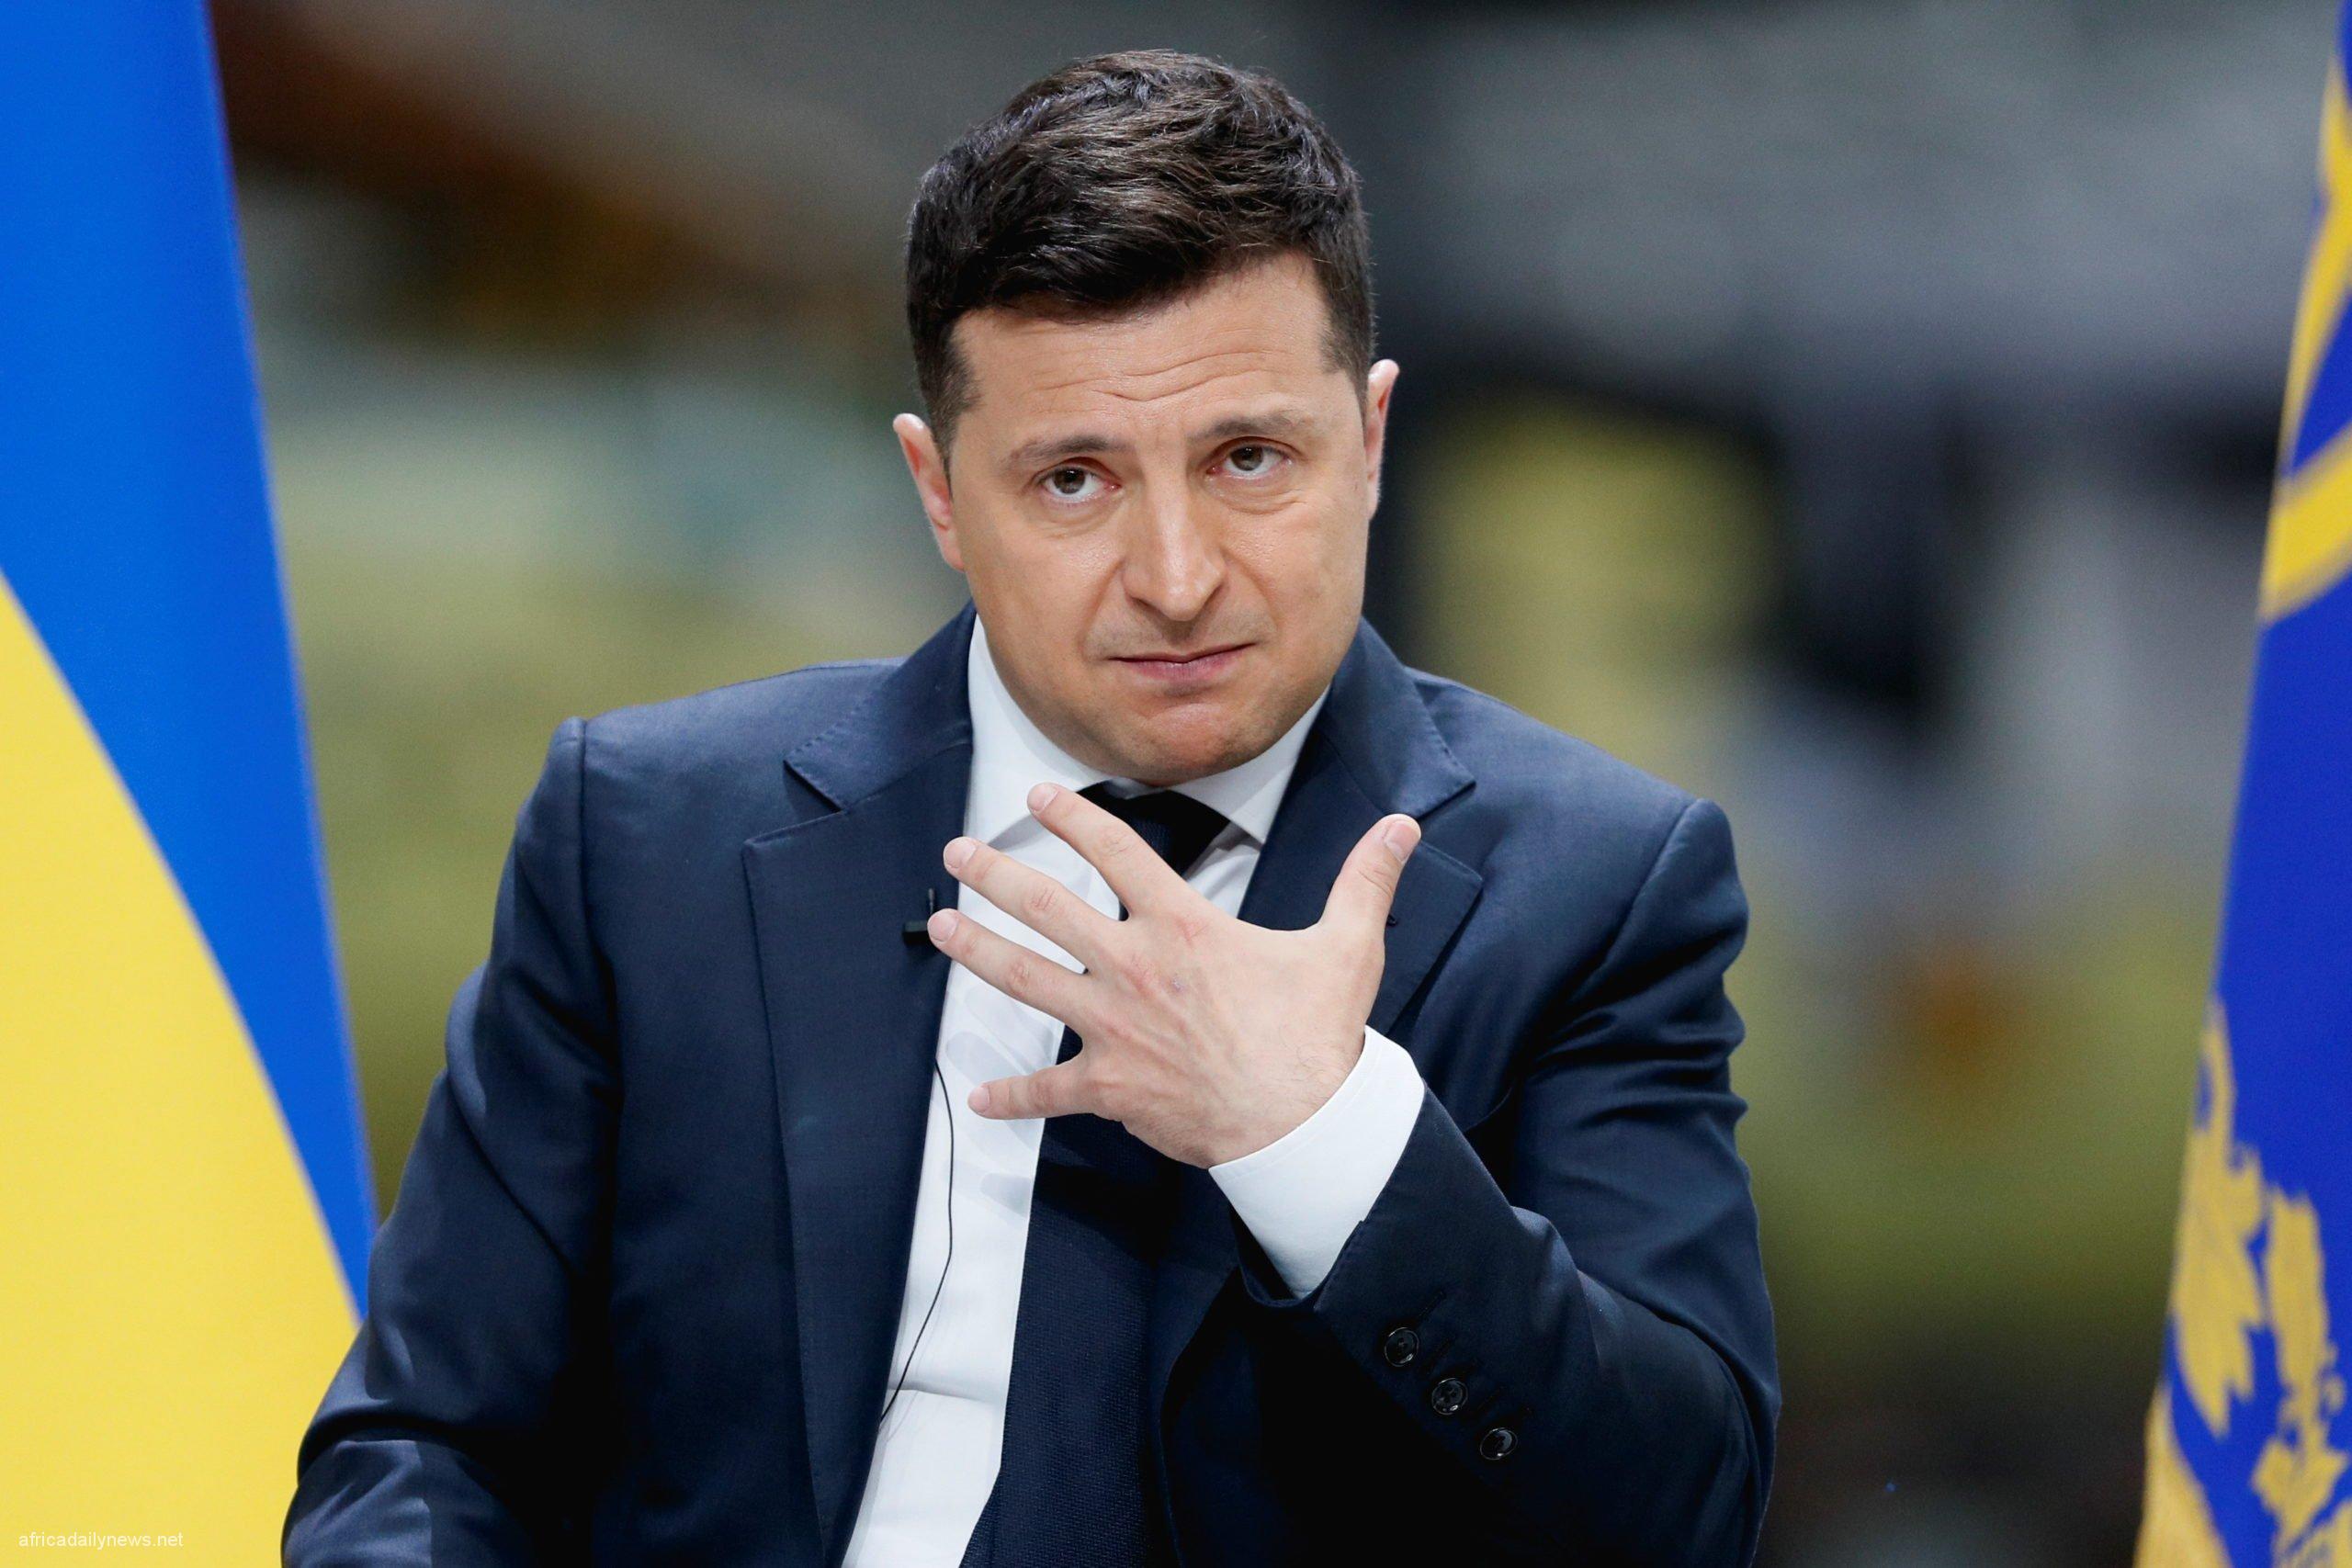 We Will Fight To The End, Ukraine President Zelensky Insists